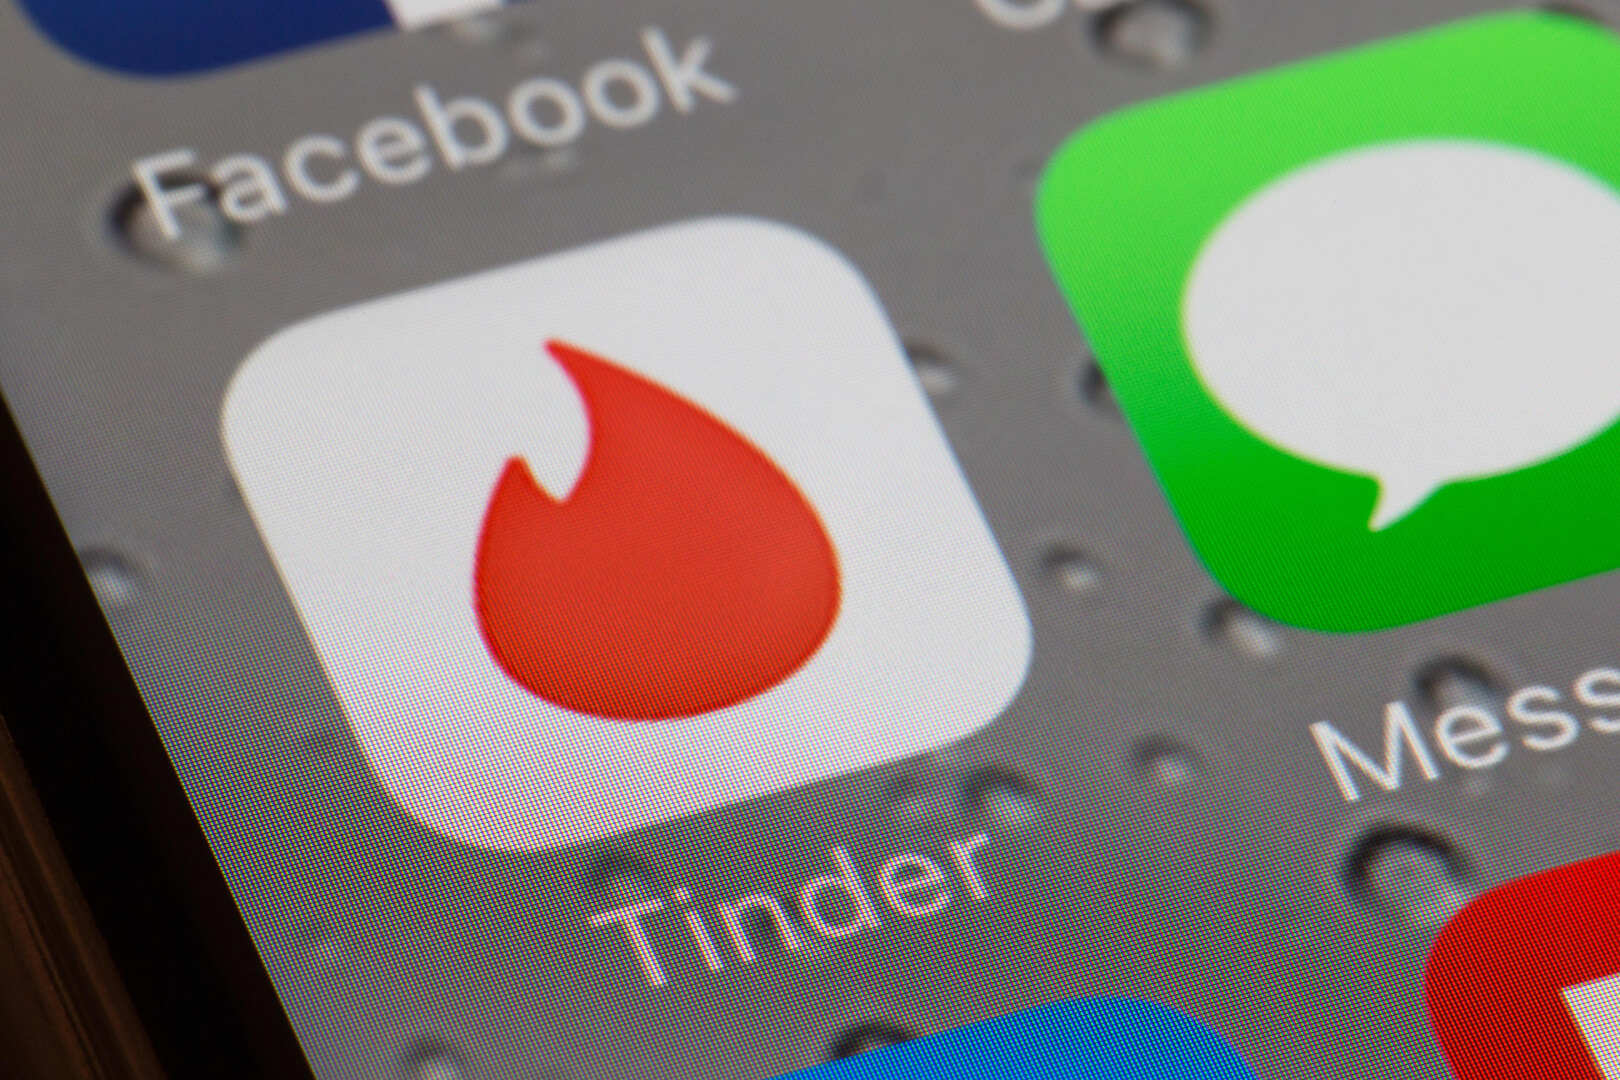 tinder-has-rolled-out-loops-its-new-two-second-video-feature